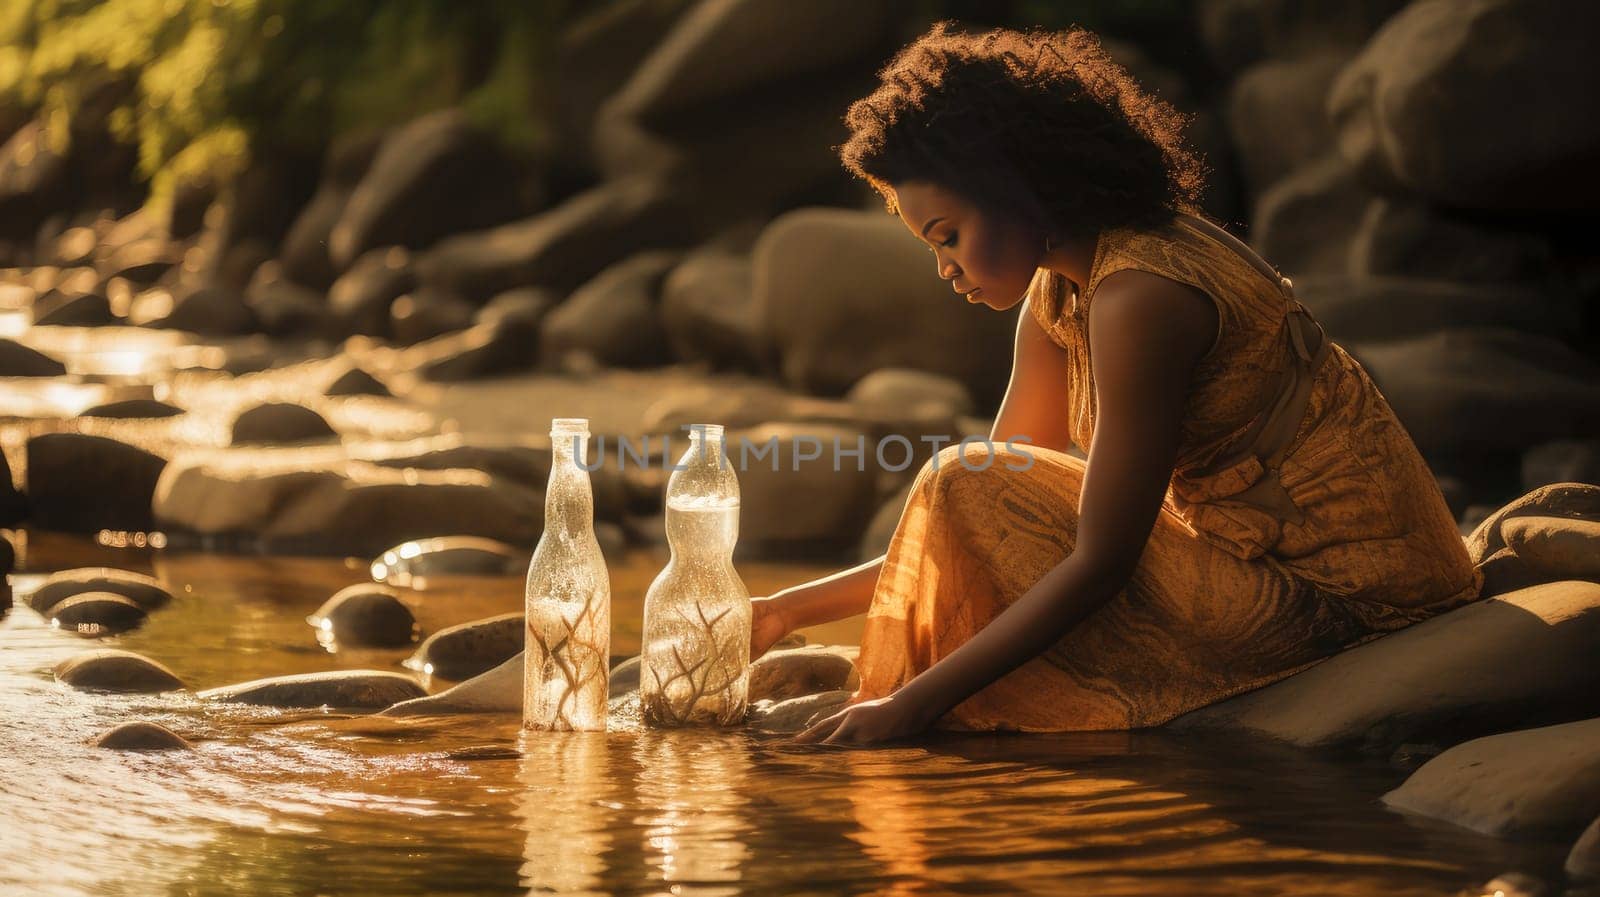 A poor, beggar, hungry dark-skinned, thin woman, girl in Africa washes dishes in a dirty river, unsanitary conditions. Water shortage on Earth due to global warming, drought, famine. Climate change, crisis environment, water crisis. Saving natural